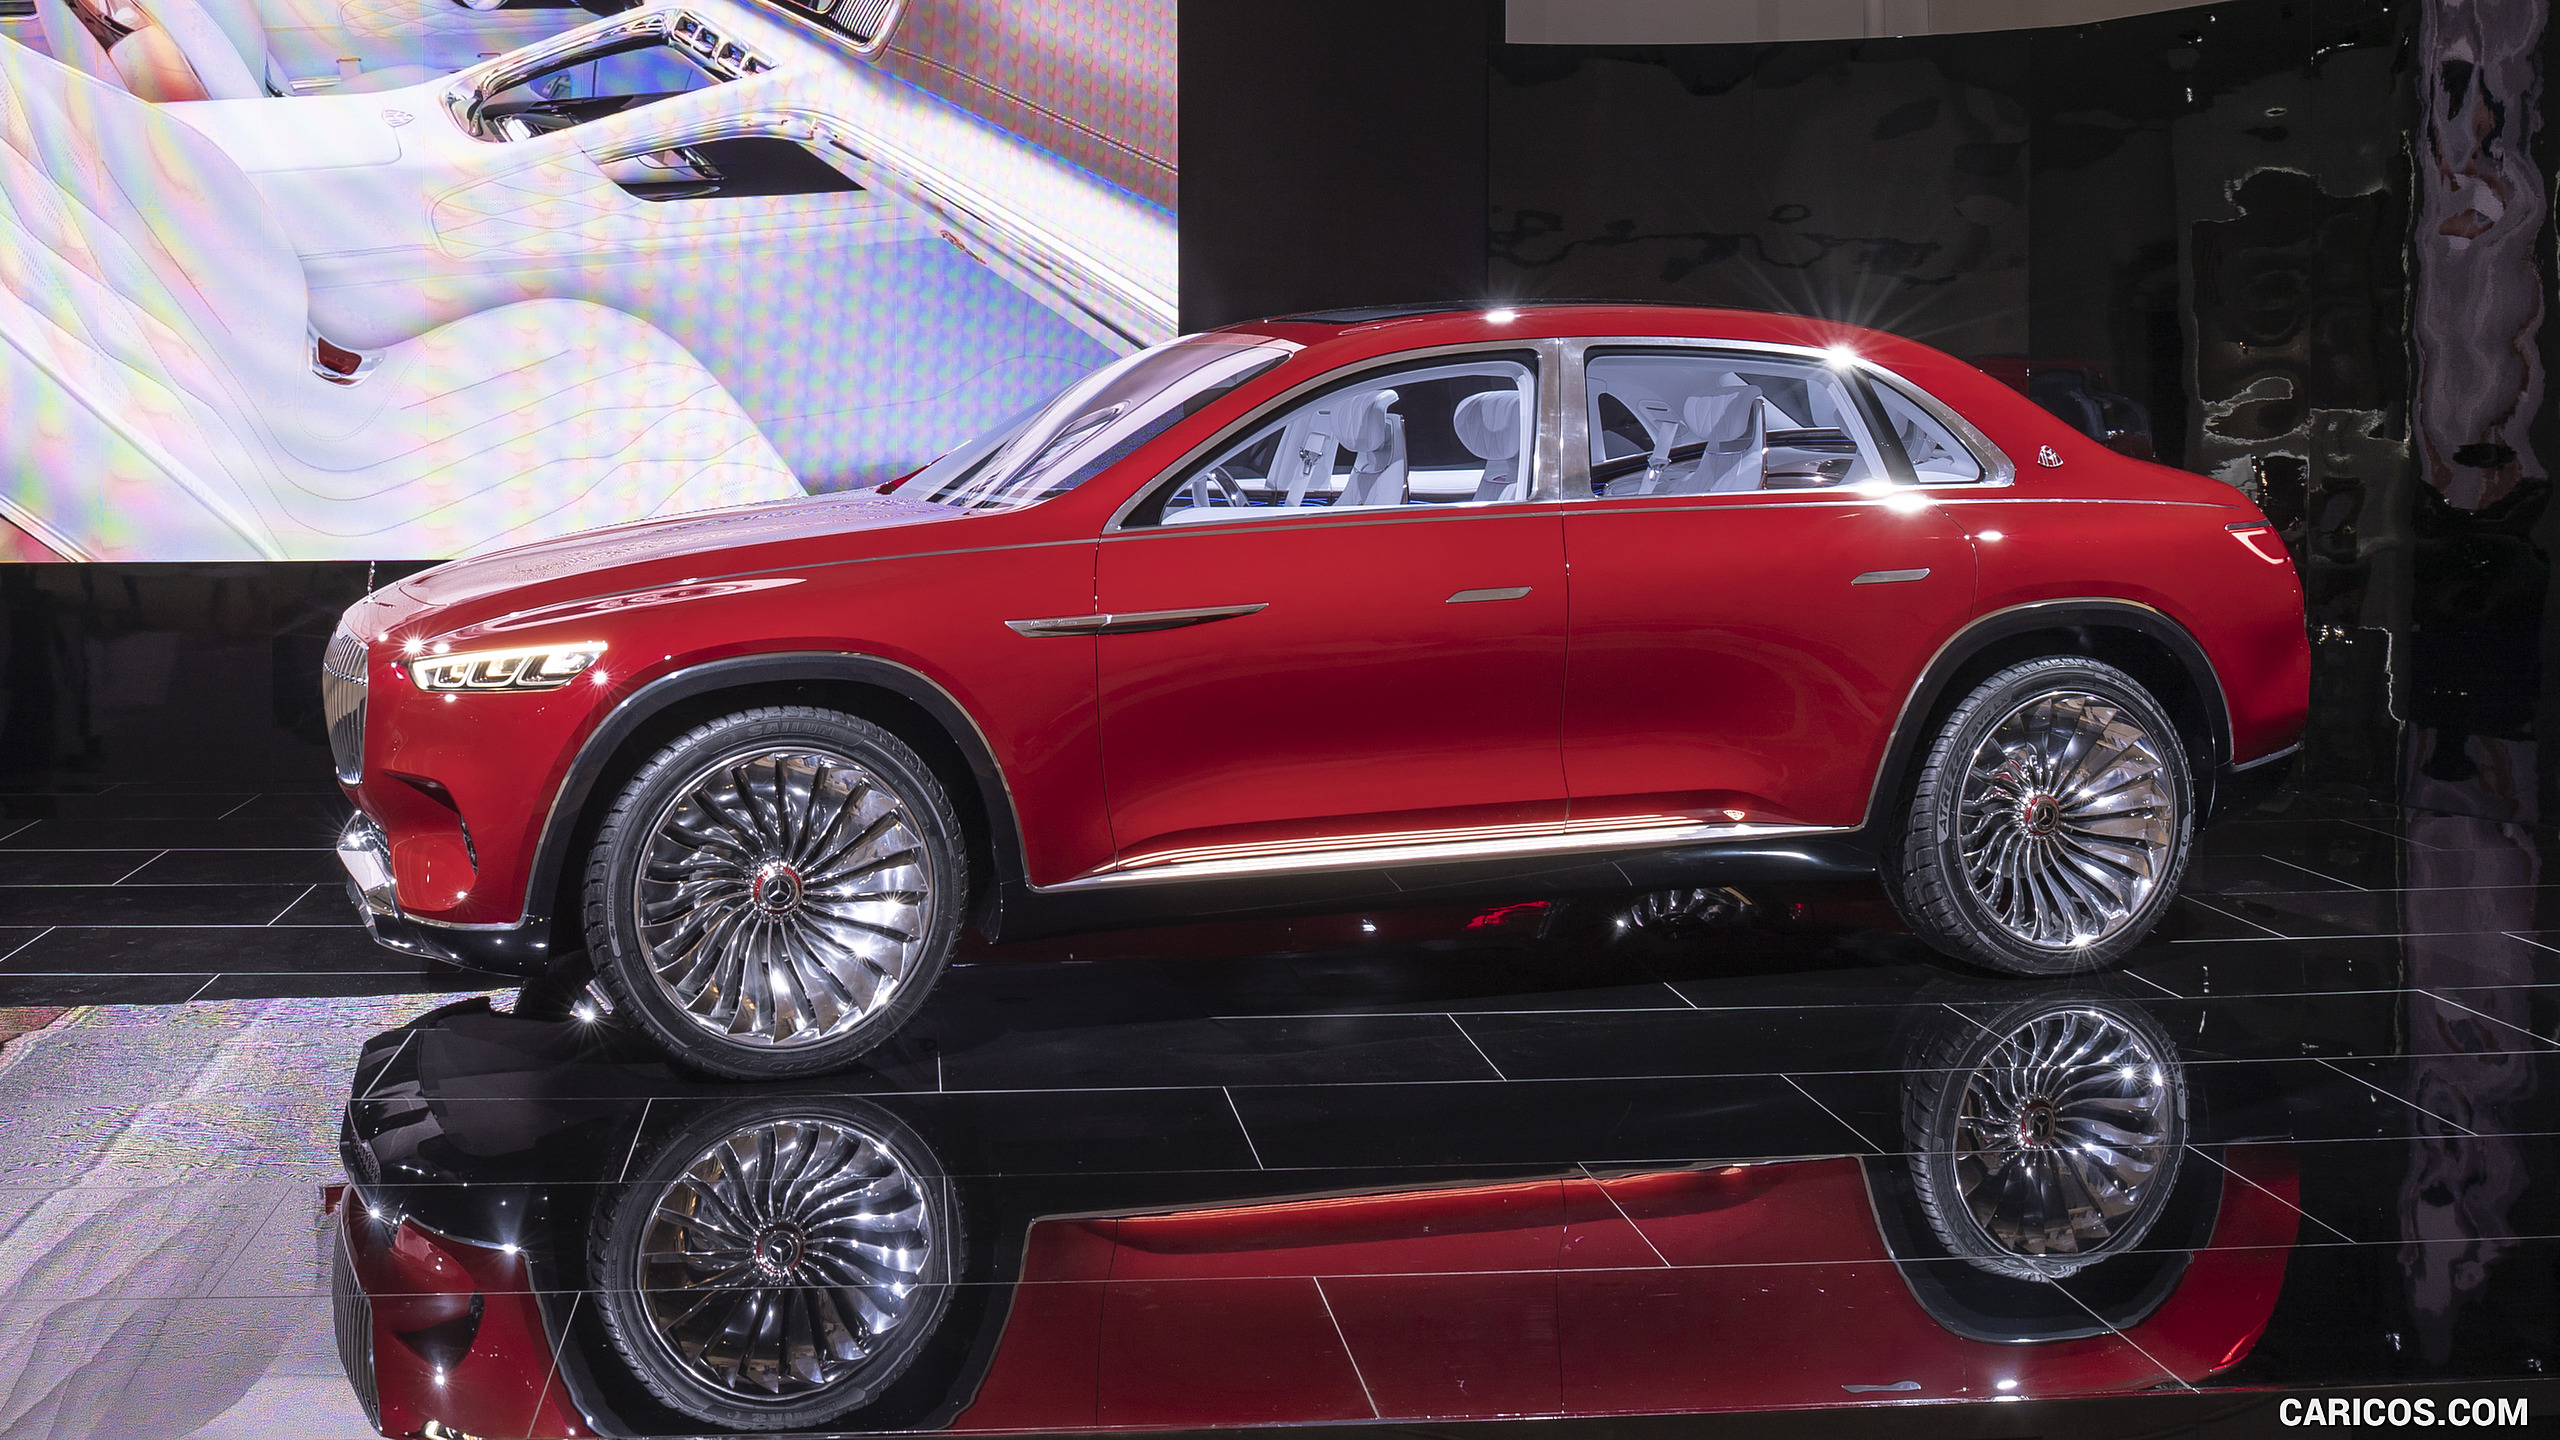 2018 Mercedes-Maybach Vision Ultimate Luxury SUV Concept - Side, #8 of 41